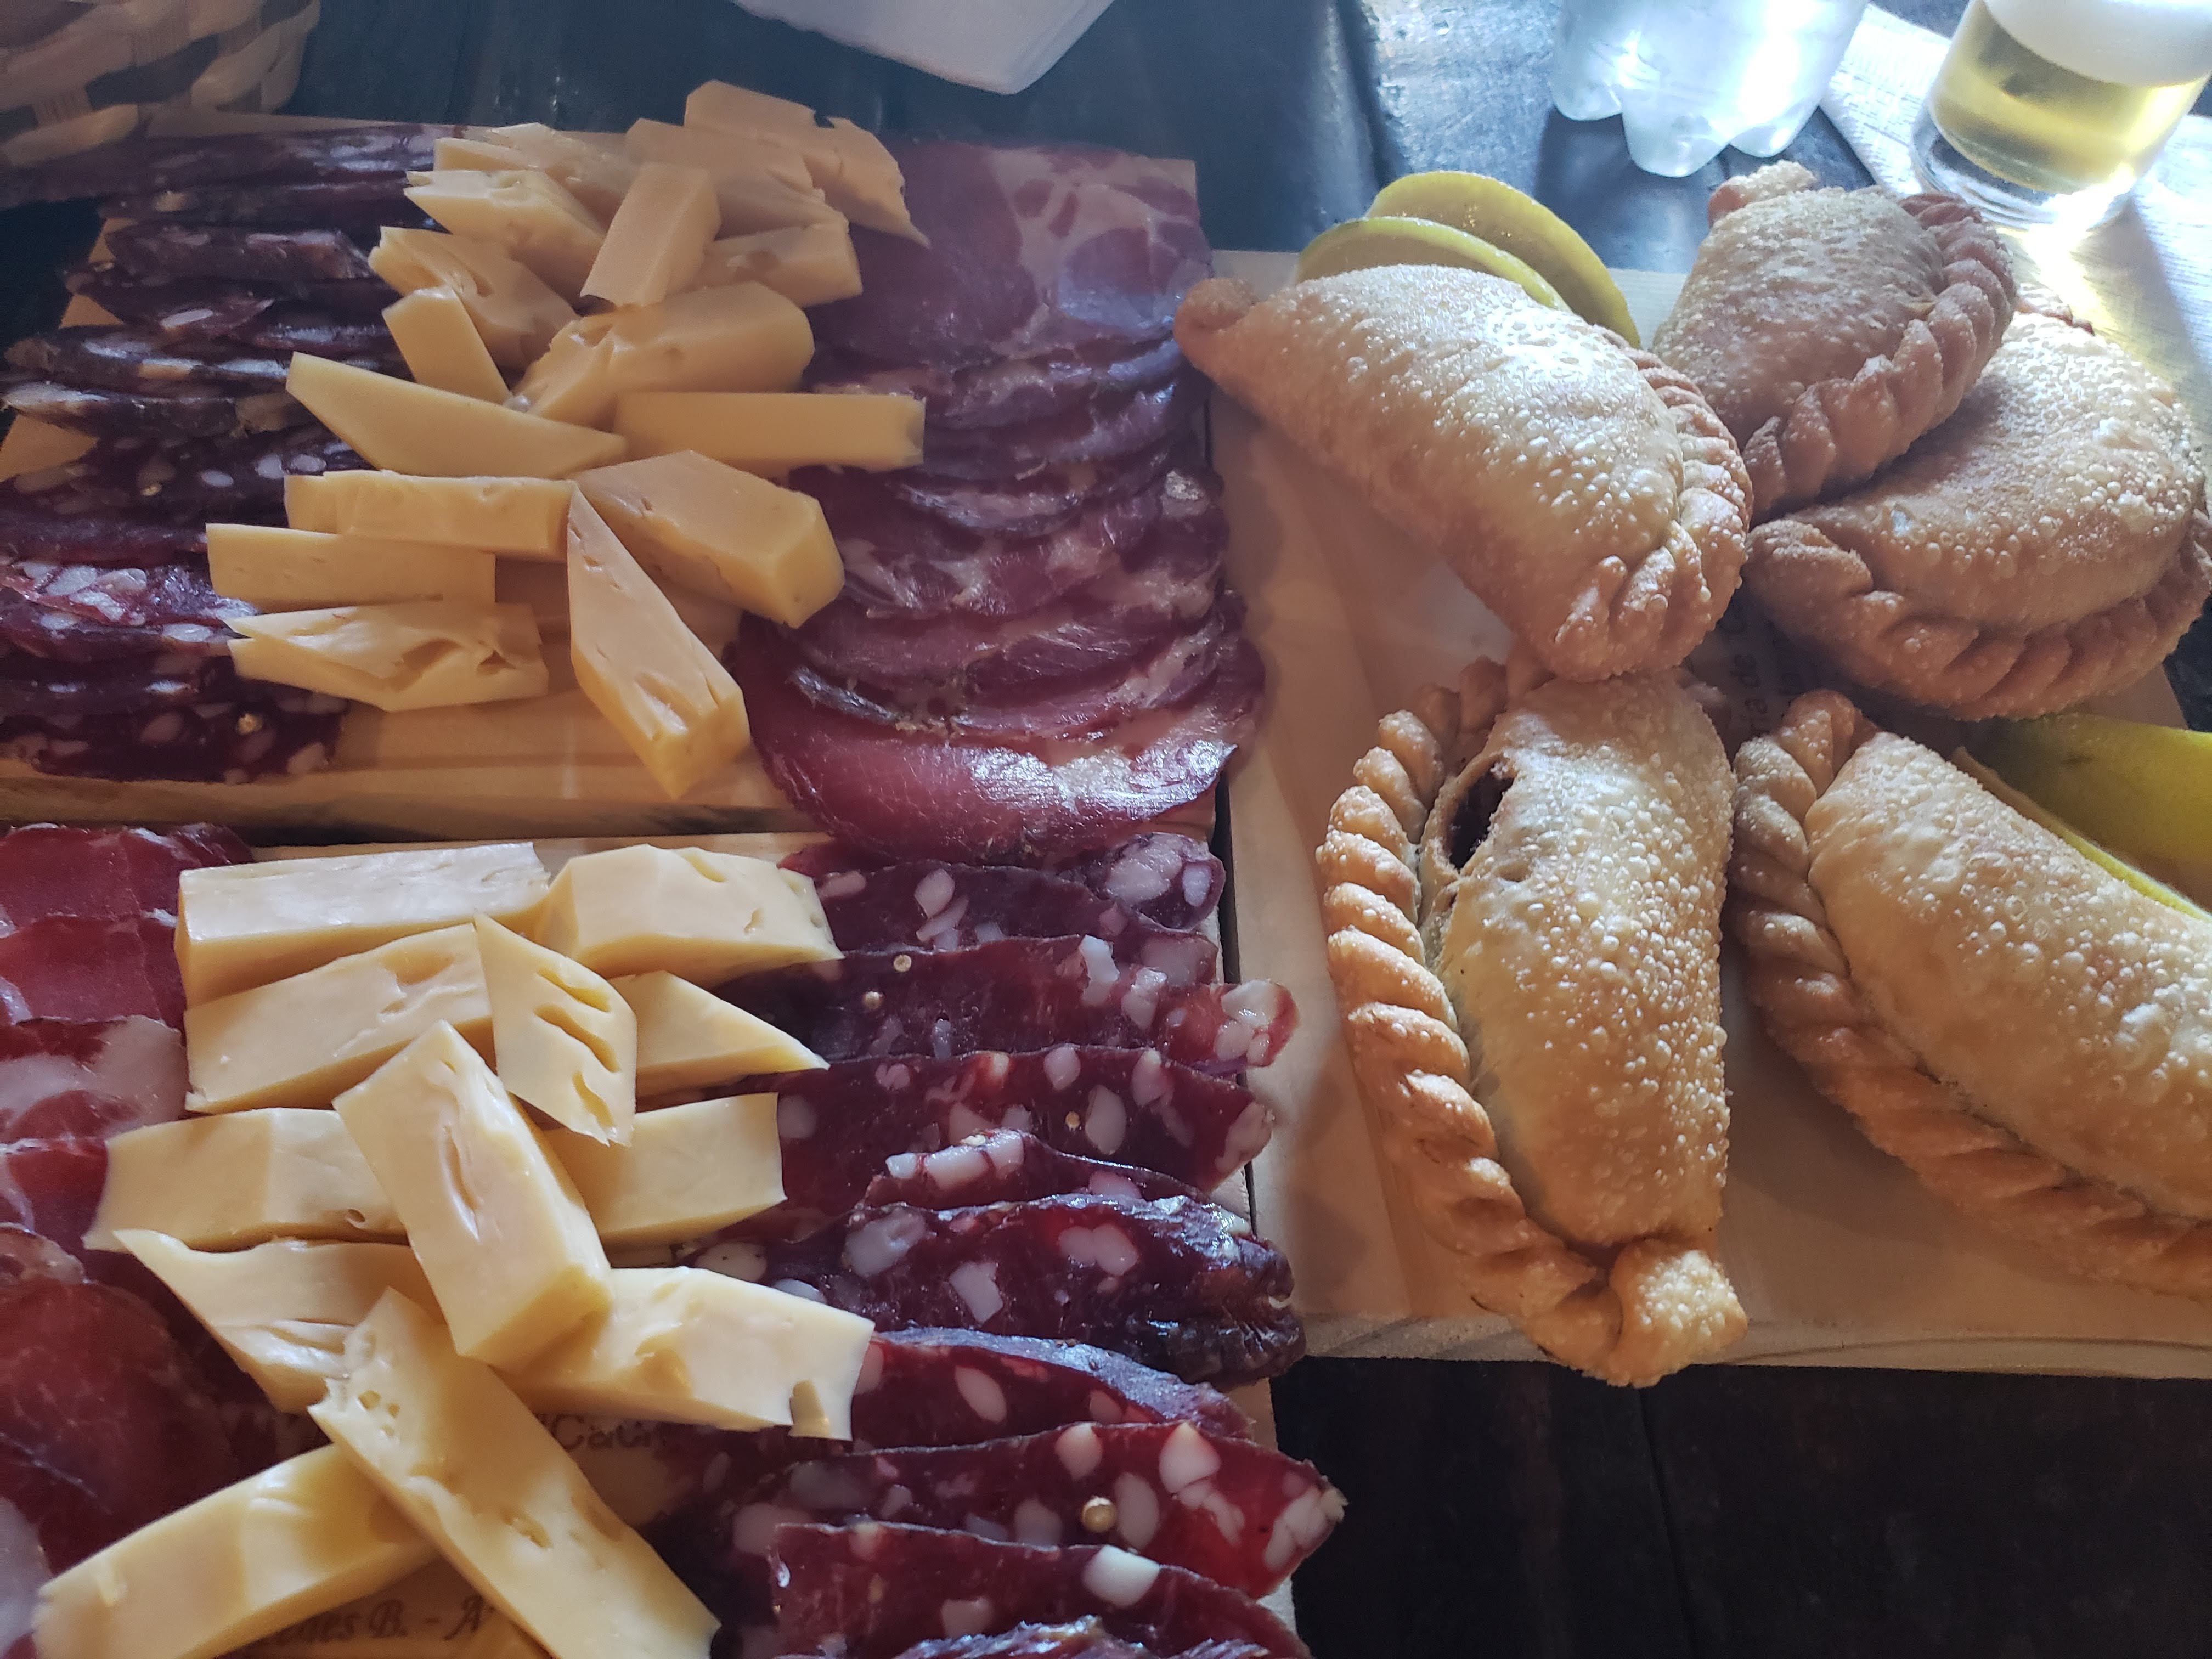 Meats and cheeses inside the Pulperias